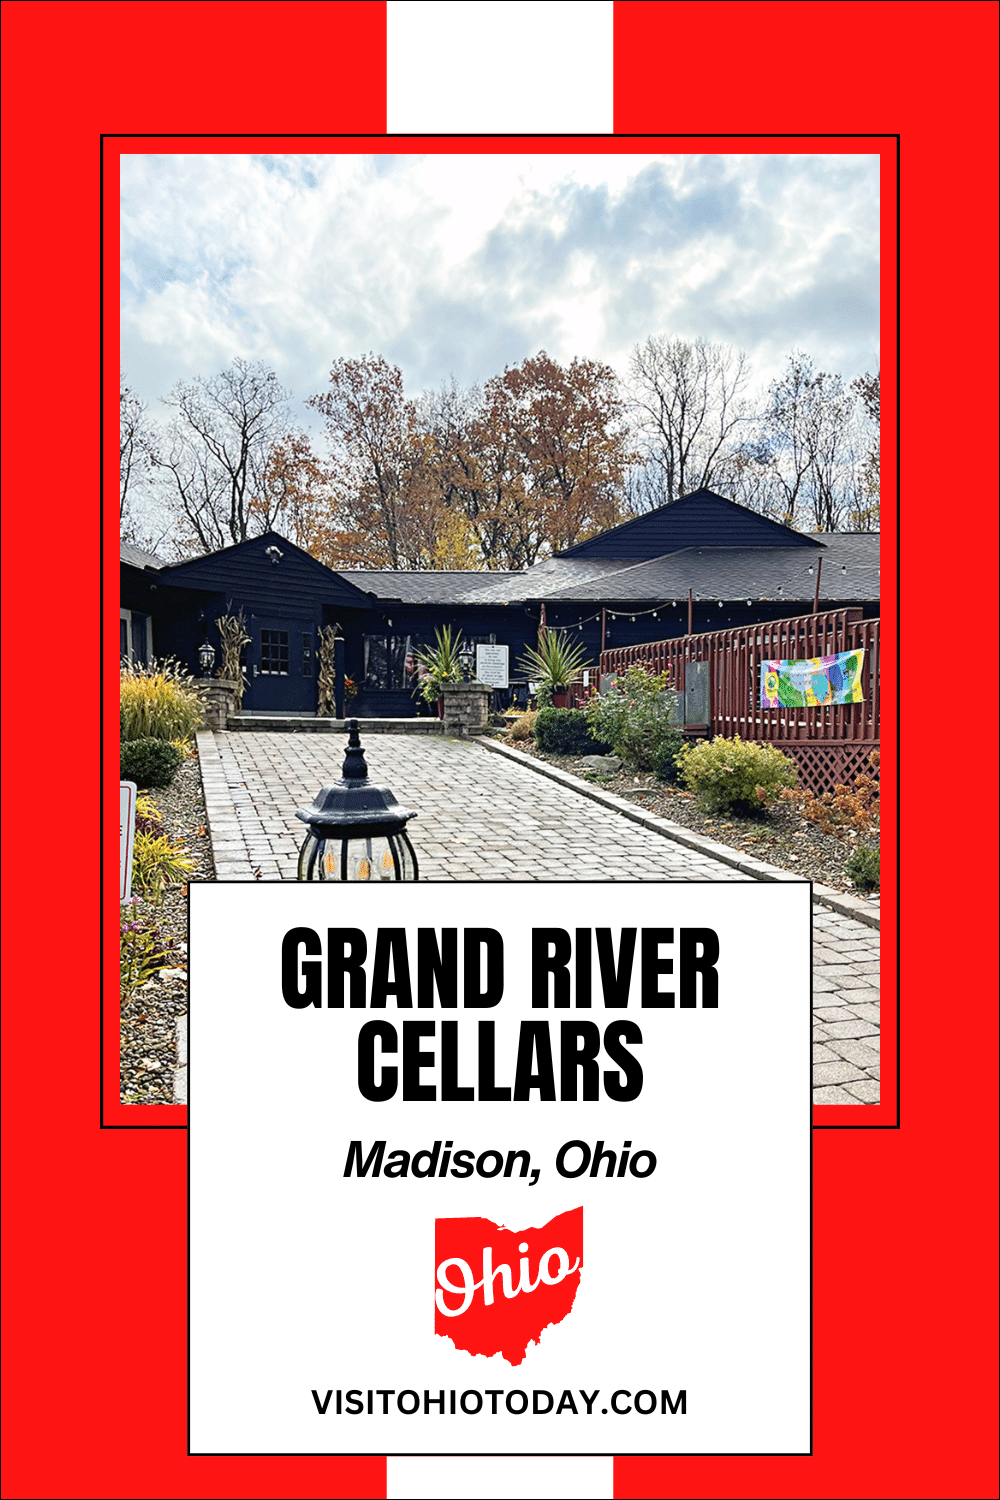 Grand River Cellars is a popular winery in Madison in the Grand River Valley. This Ohio winery offers food, wine, and entertainment!